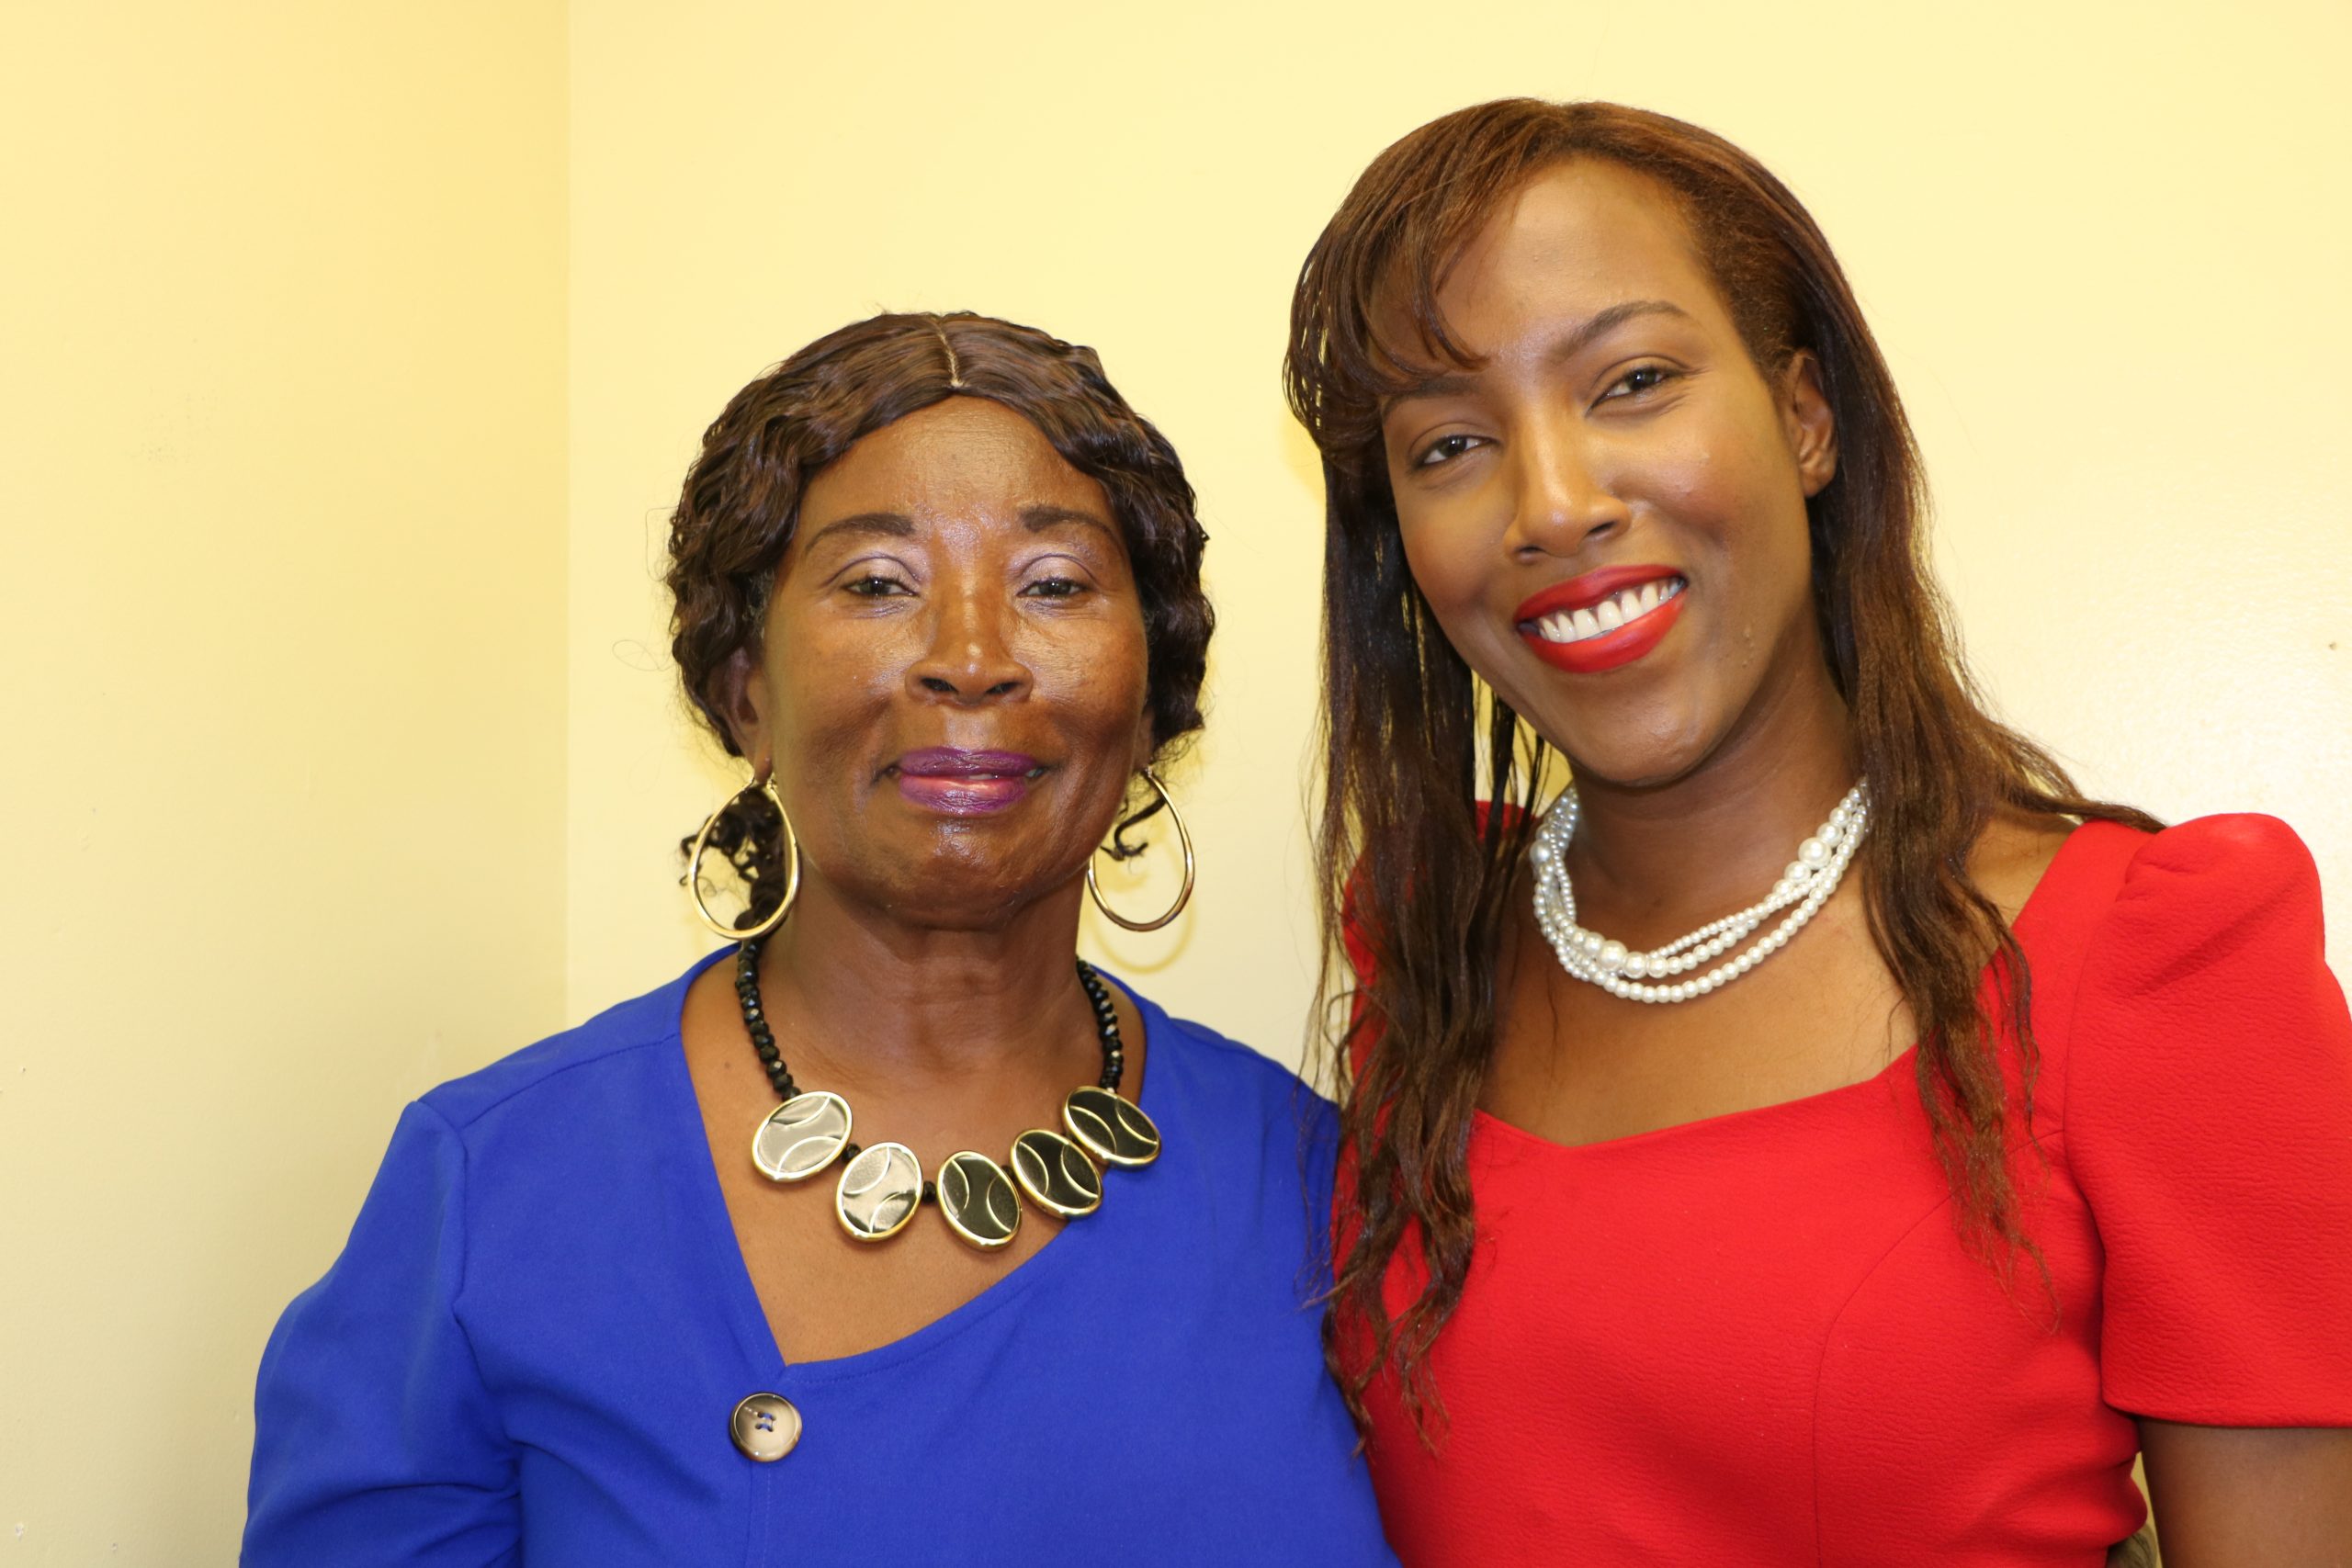 (L-r) Ms. Earlene Maynard of Mount Lily Village, Patron for the Annual Christmas Tree Lighting in Charlestown on December, 07, 2022, with Ms. Denesia Smithen, Deputy Director at the Department of Community Development while at the Department of Information in November 29, 2022